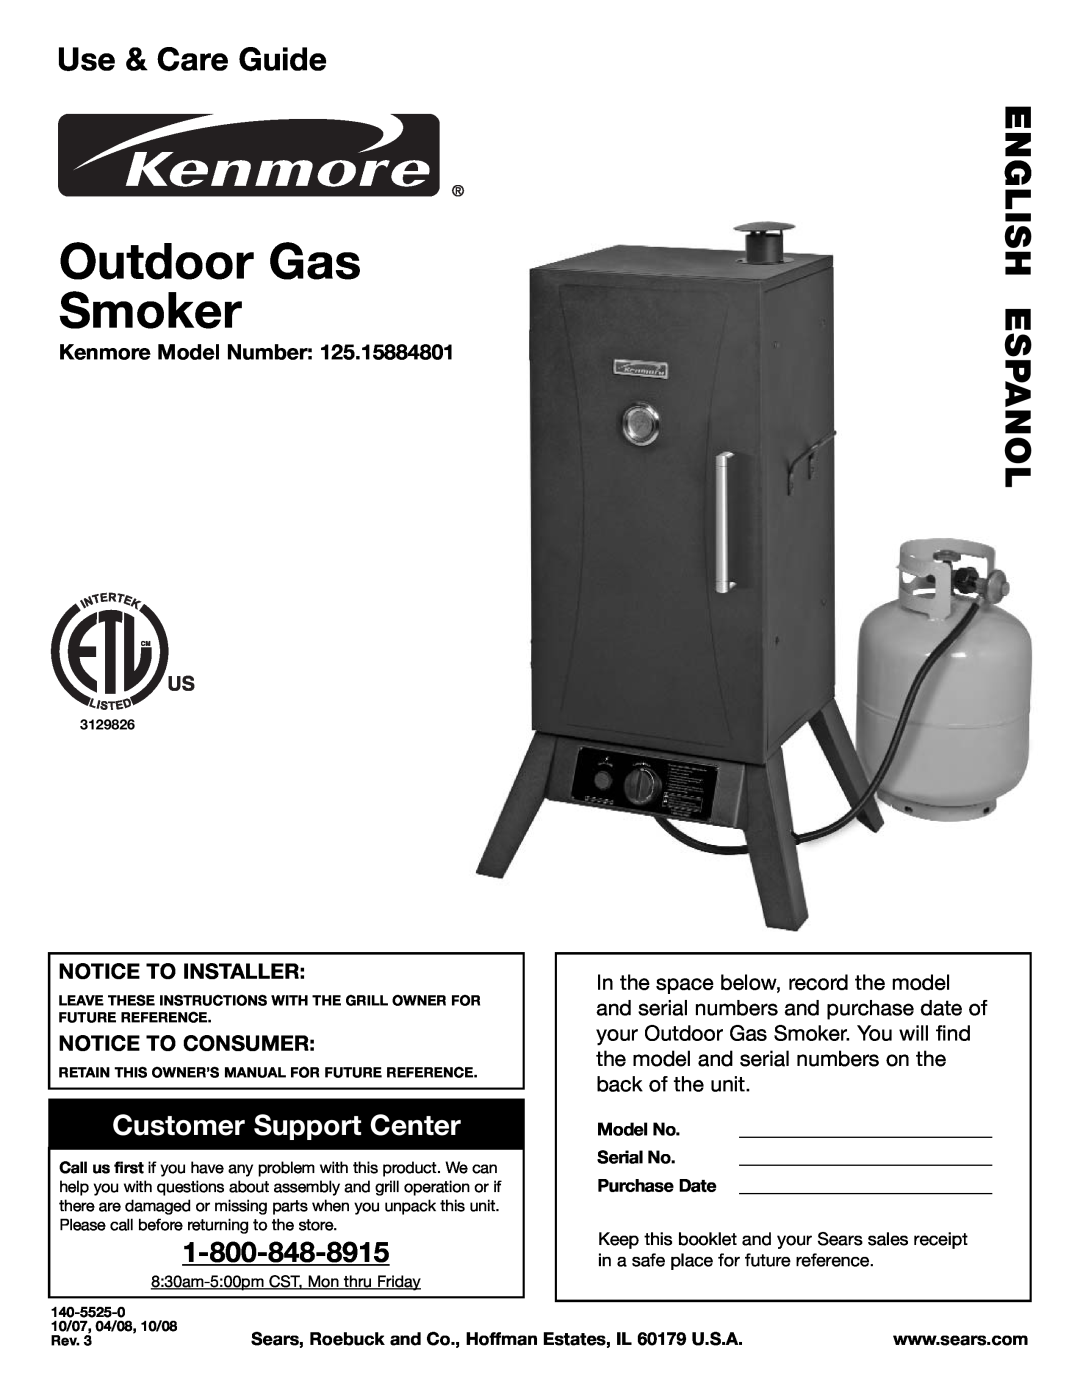 Kenmore 125.15884801 owner manual Outdoor Gas Smoker, Use & Care Guide, Customer Support Center, English Espanol, Model No 